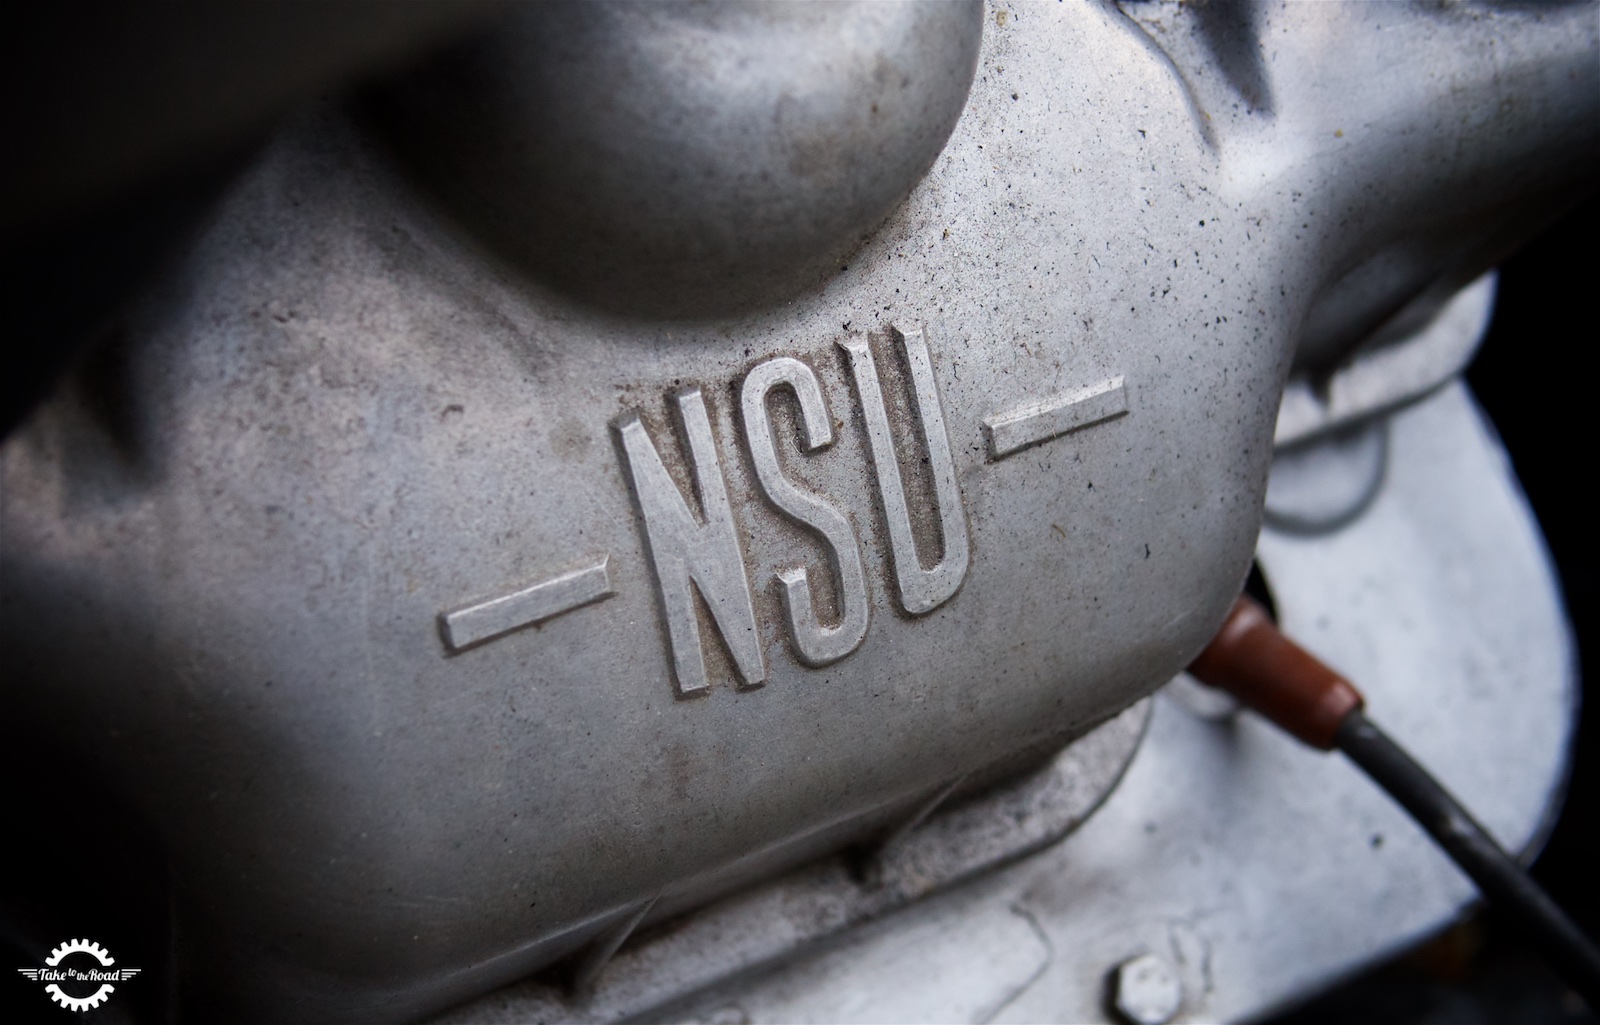 Take to the Road Video Feature NSU Prinz